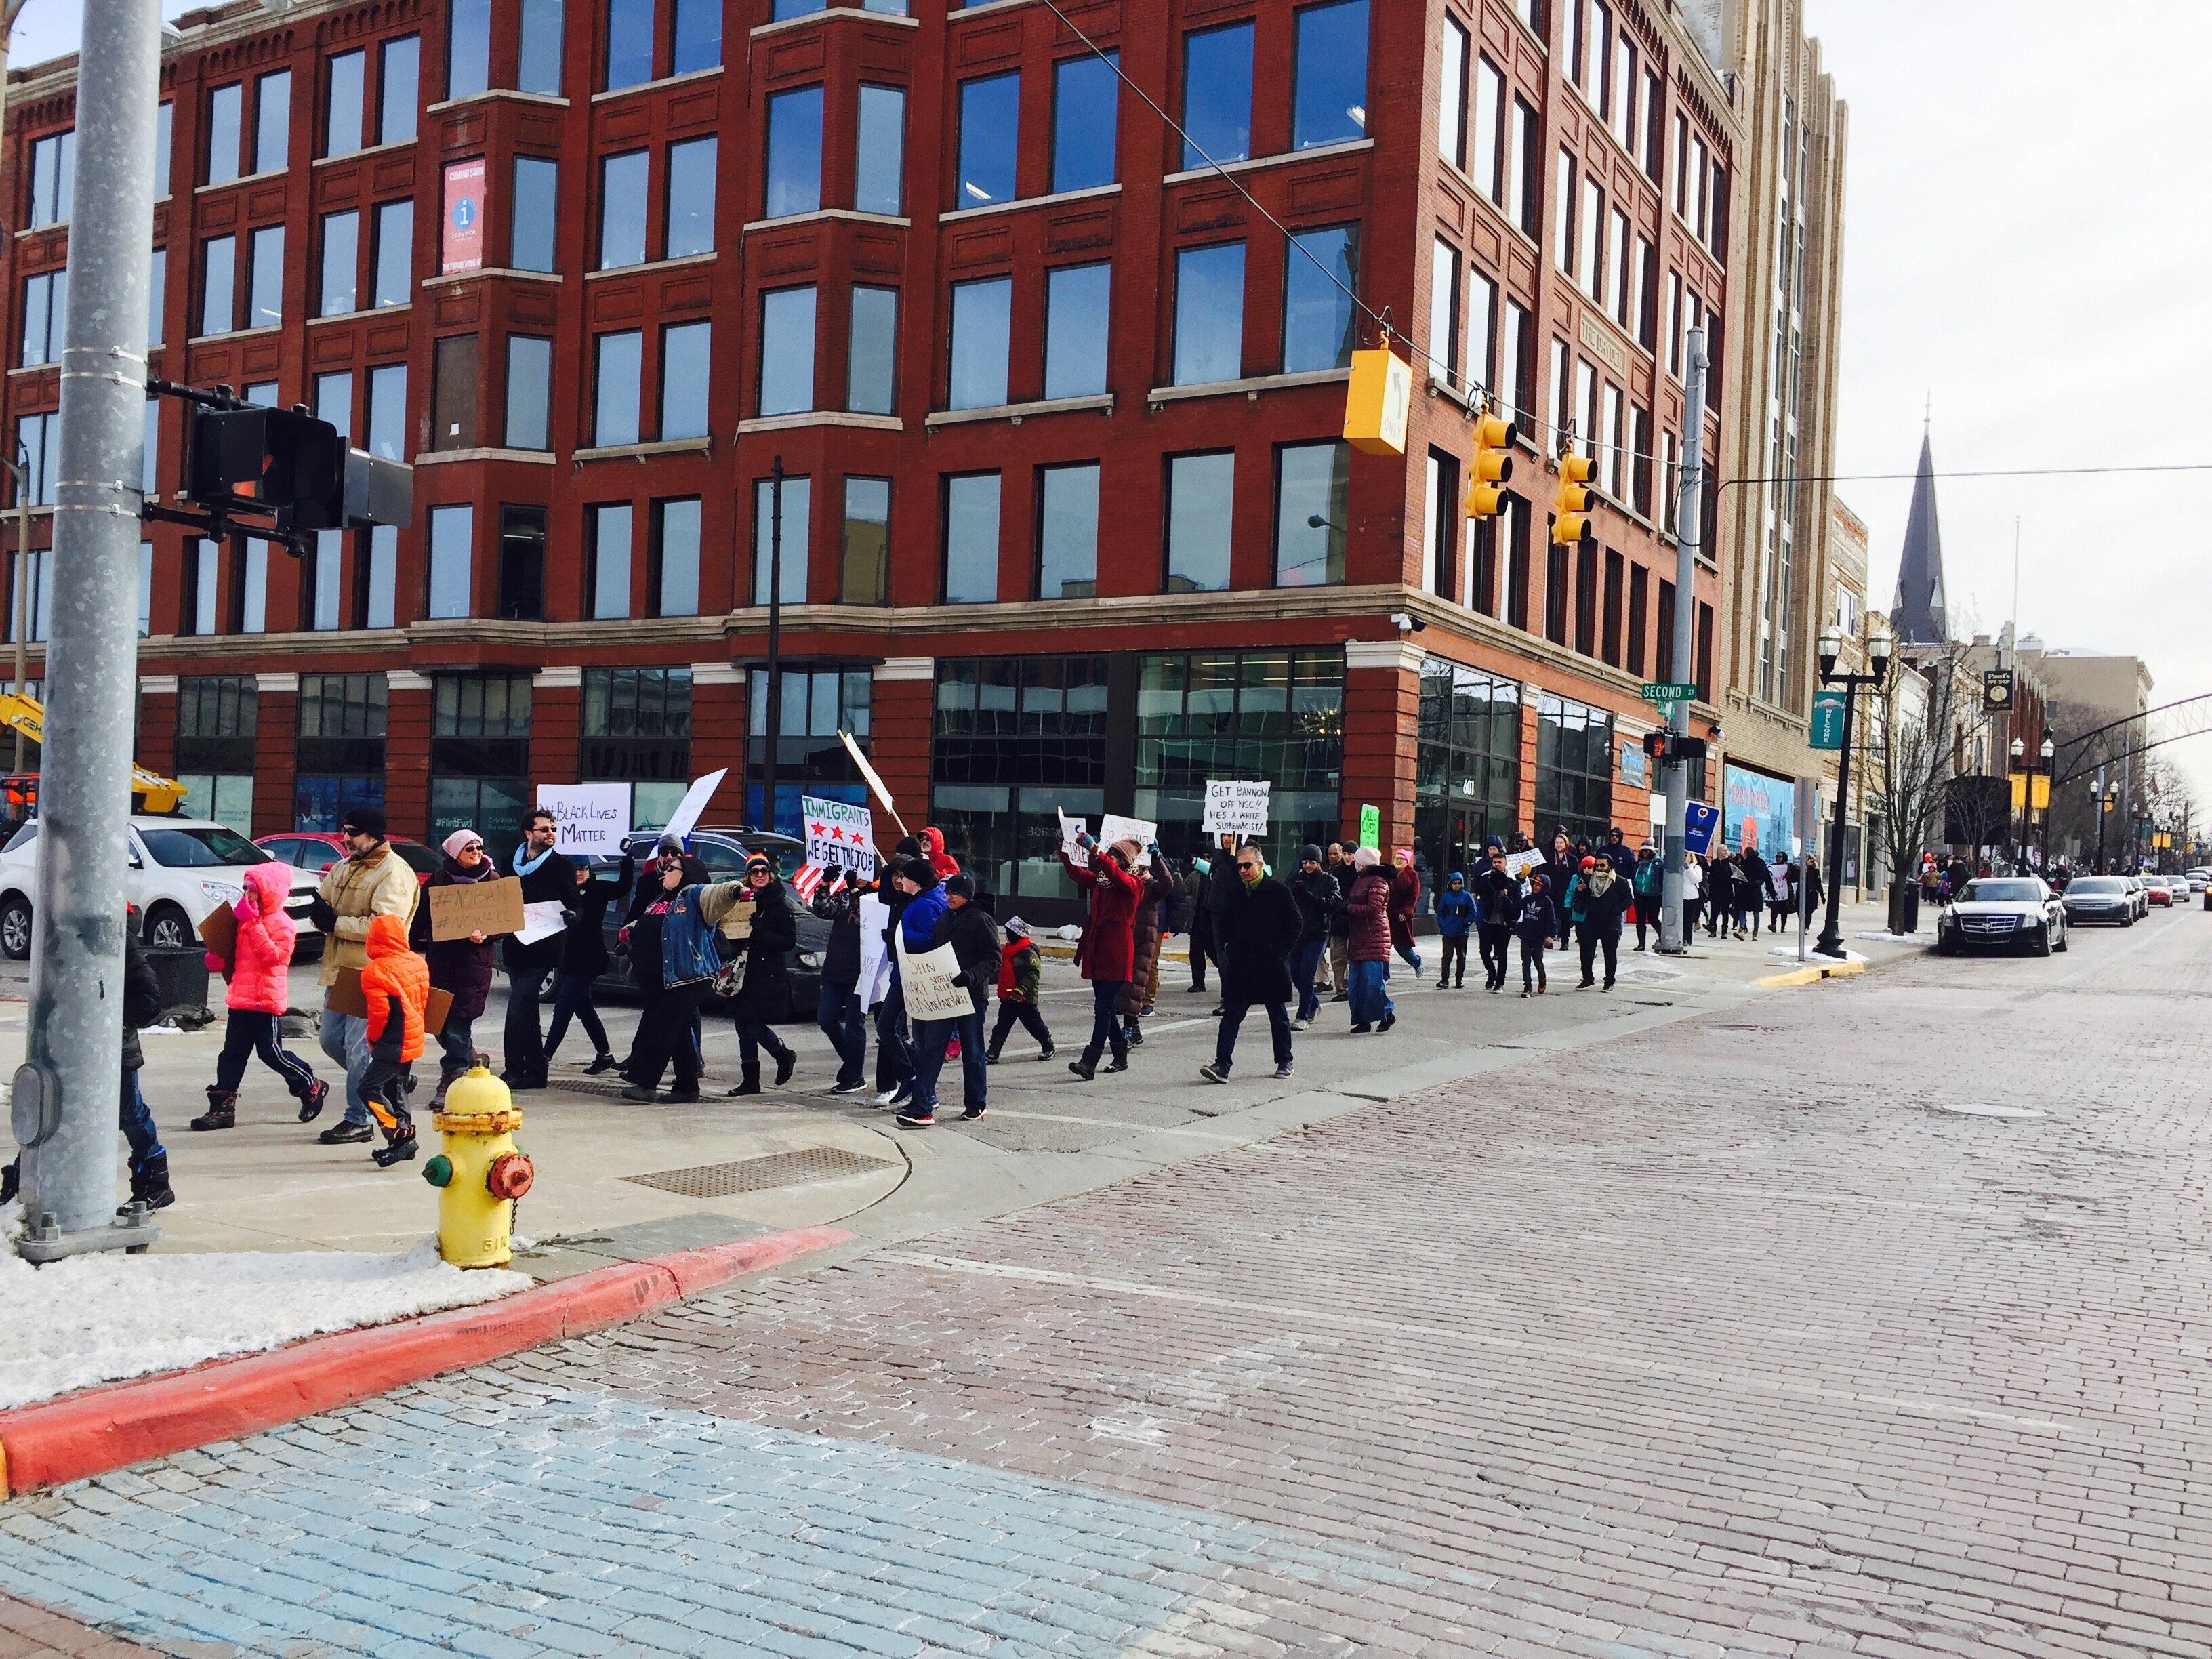 Marchers walked from City Hall to UM-Flint in support of Muslim residents in the community.